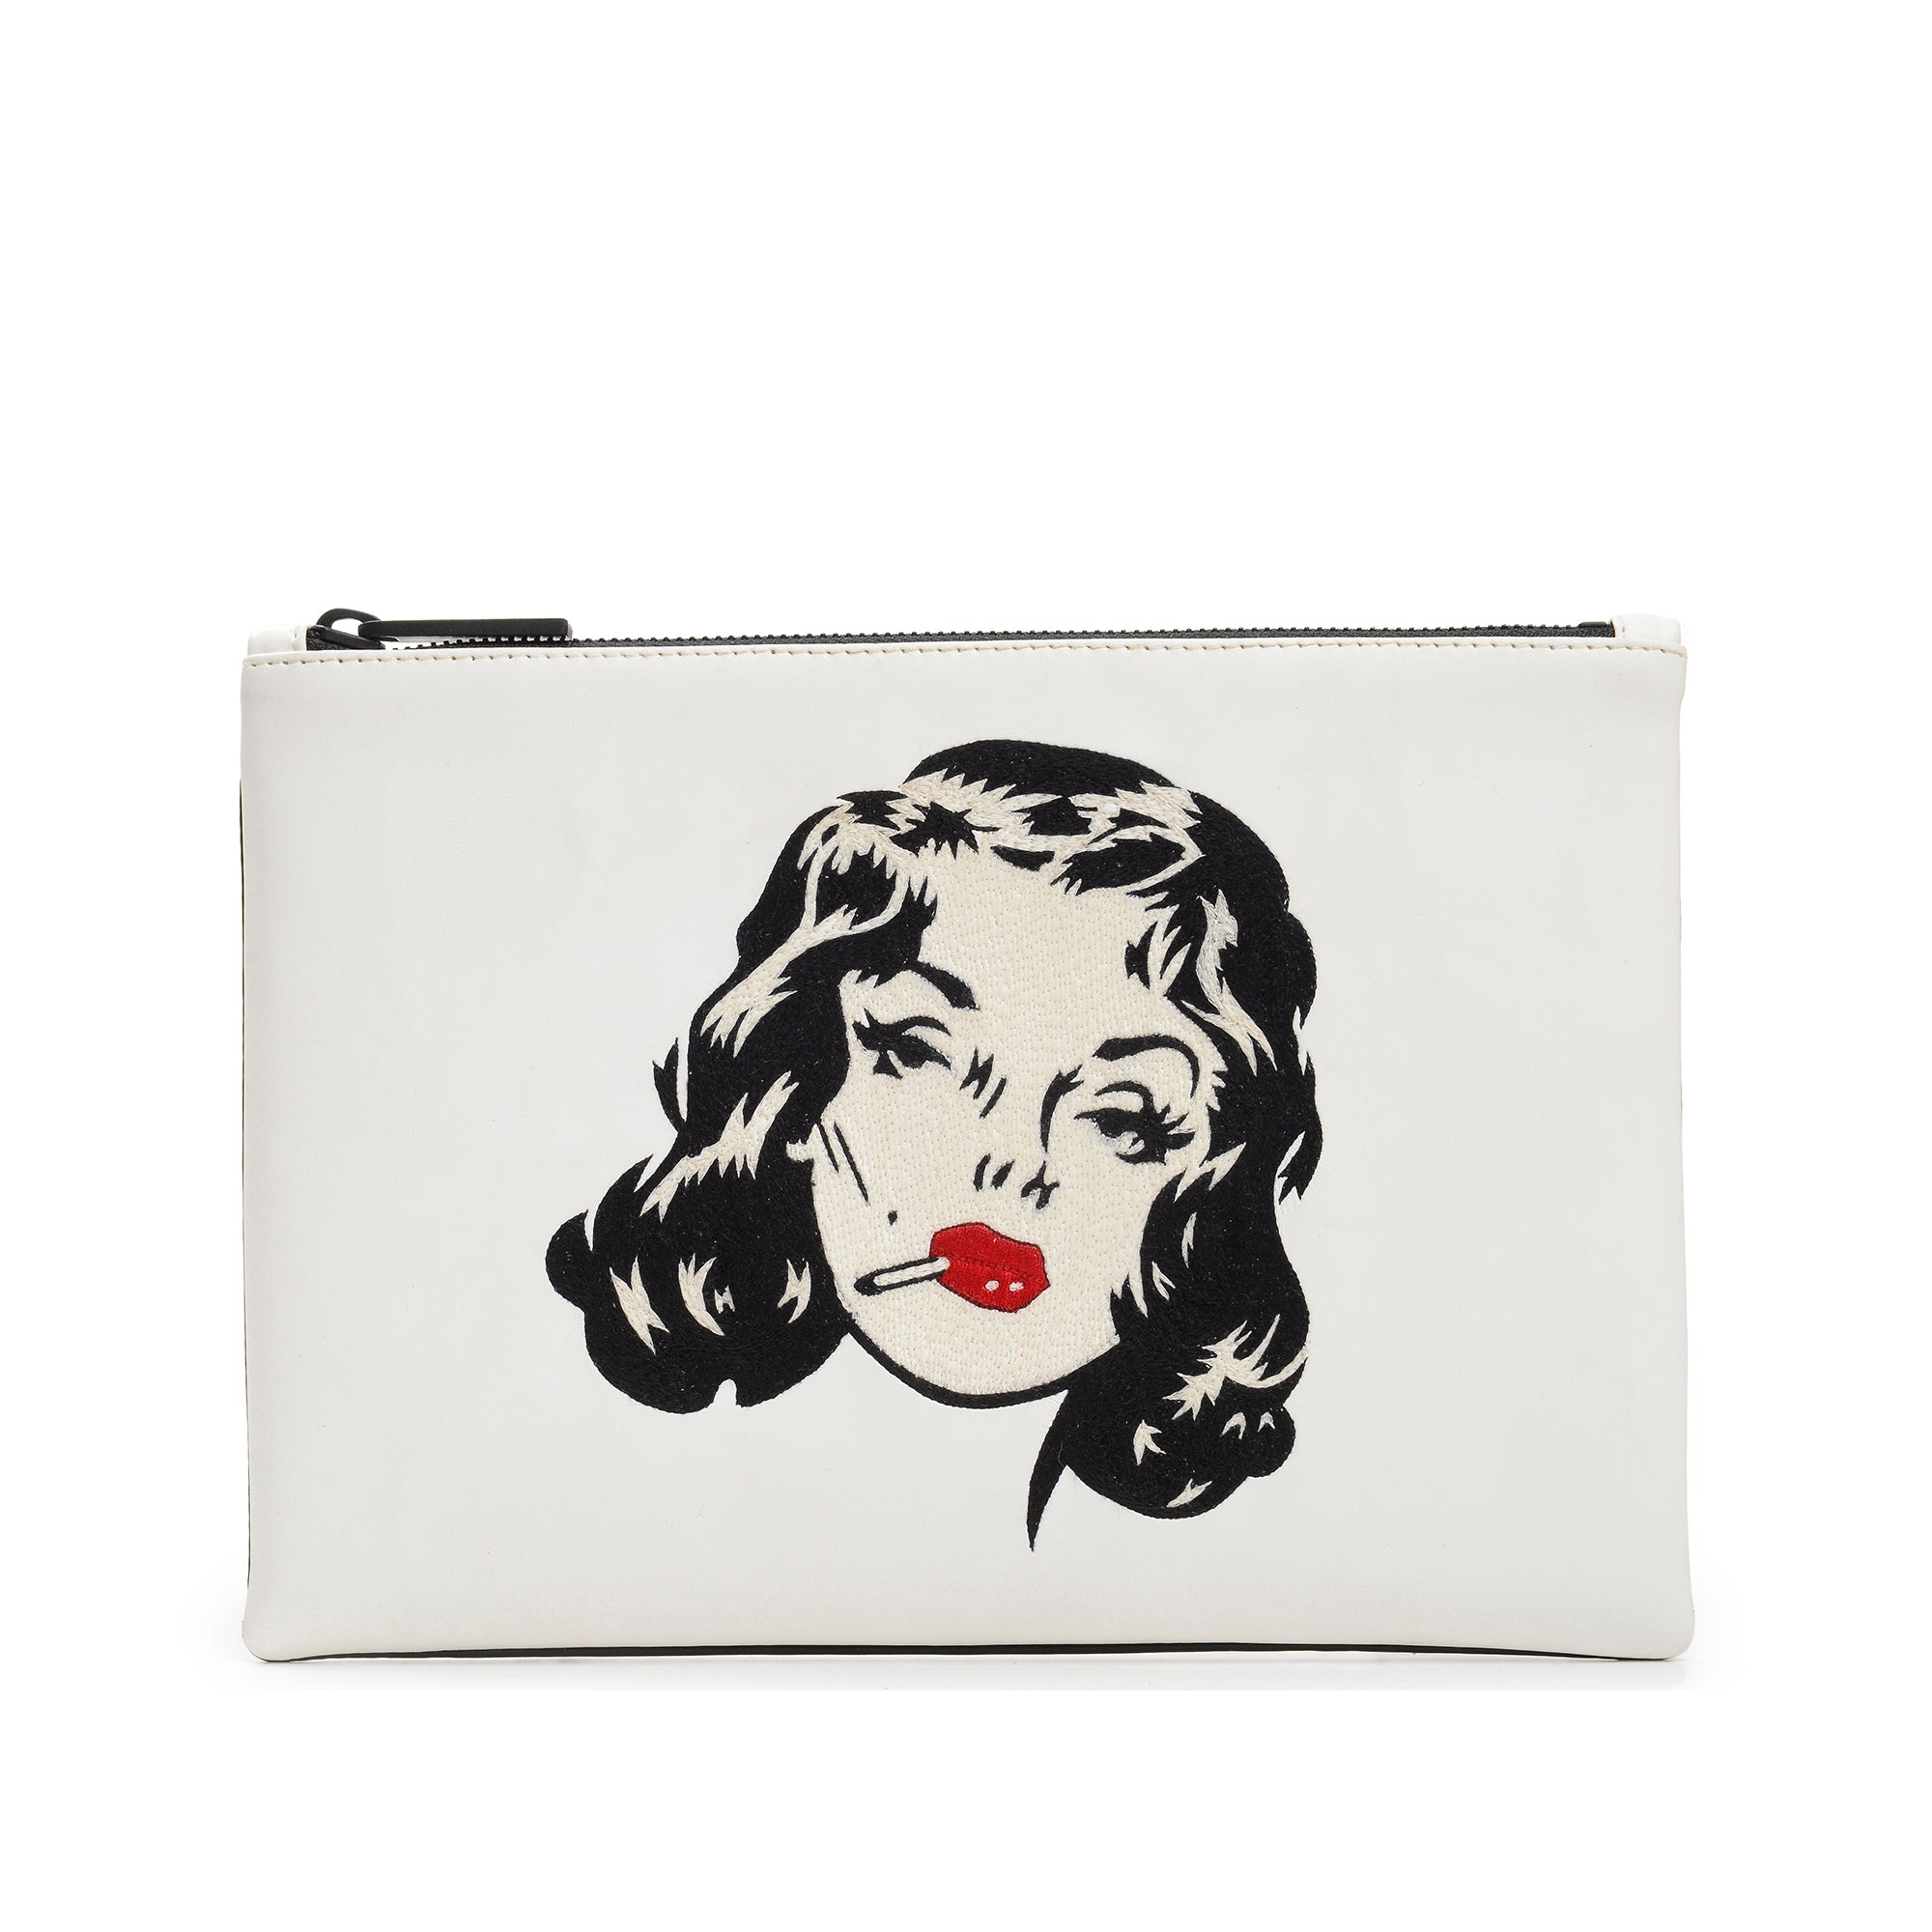 PULP EMBROIDERED CLUTCH BAG